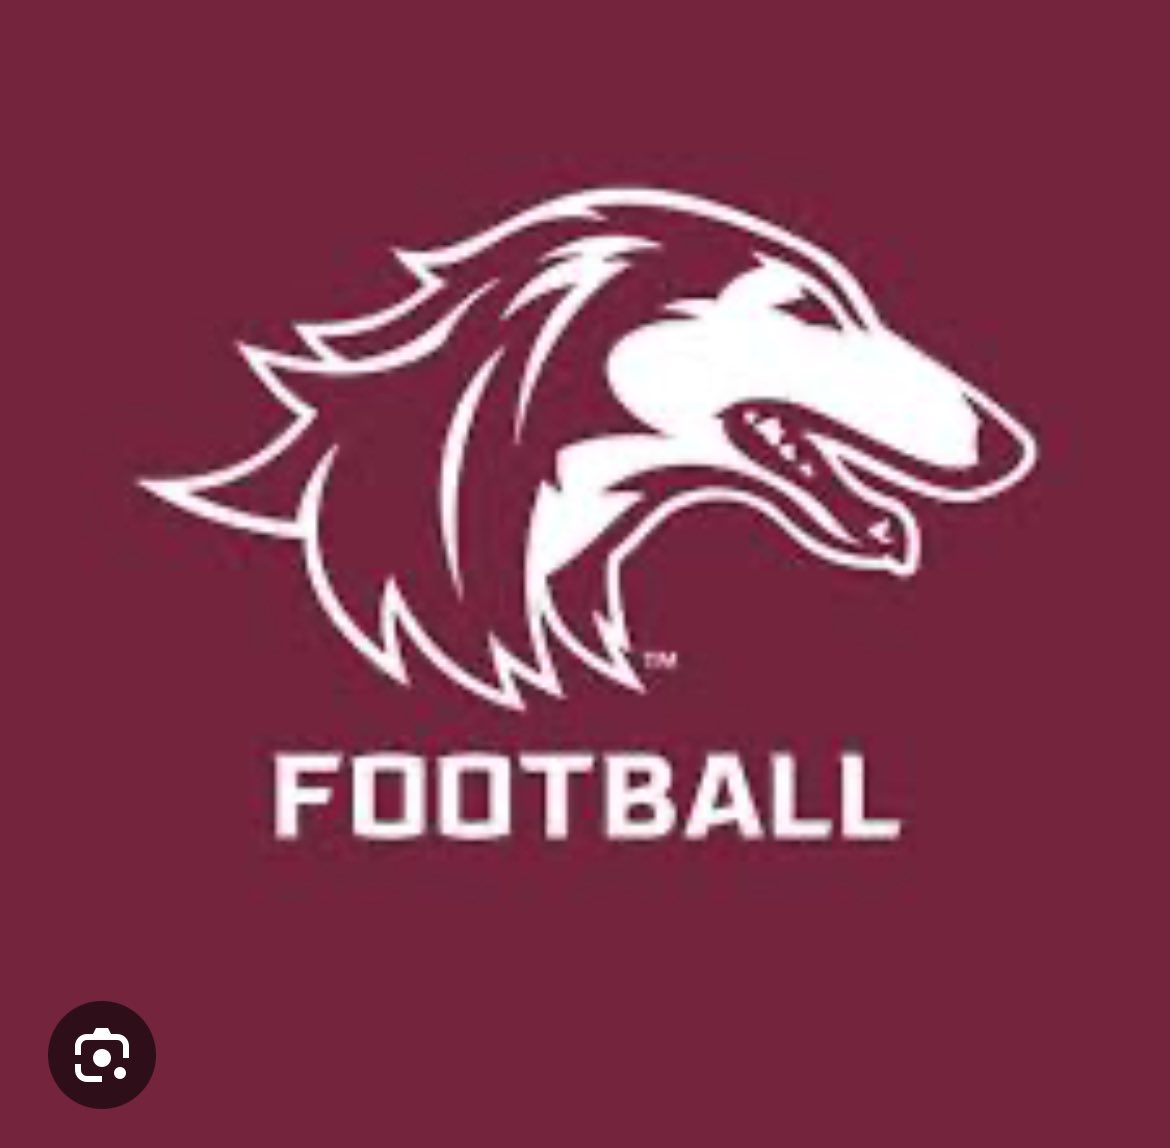 After an great conversation with @coachWarnerRB I am blessed to receive another d1 offer from Southern Illinois University ⬛️⬛️@CoachCSmithBHS @johnvarlas @CSmithScout